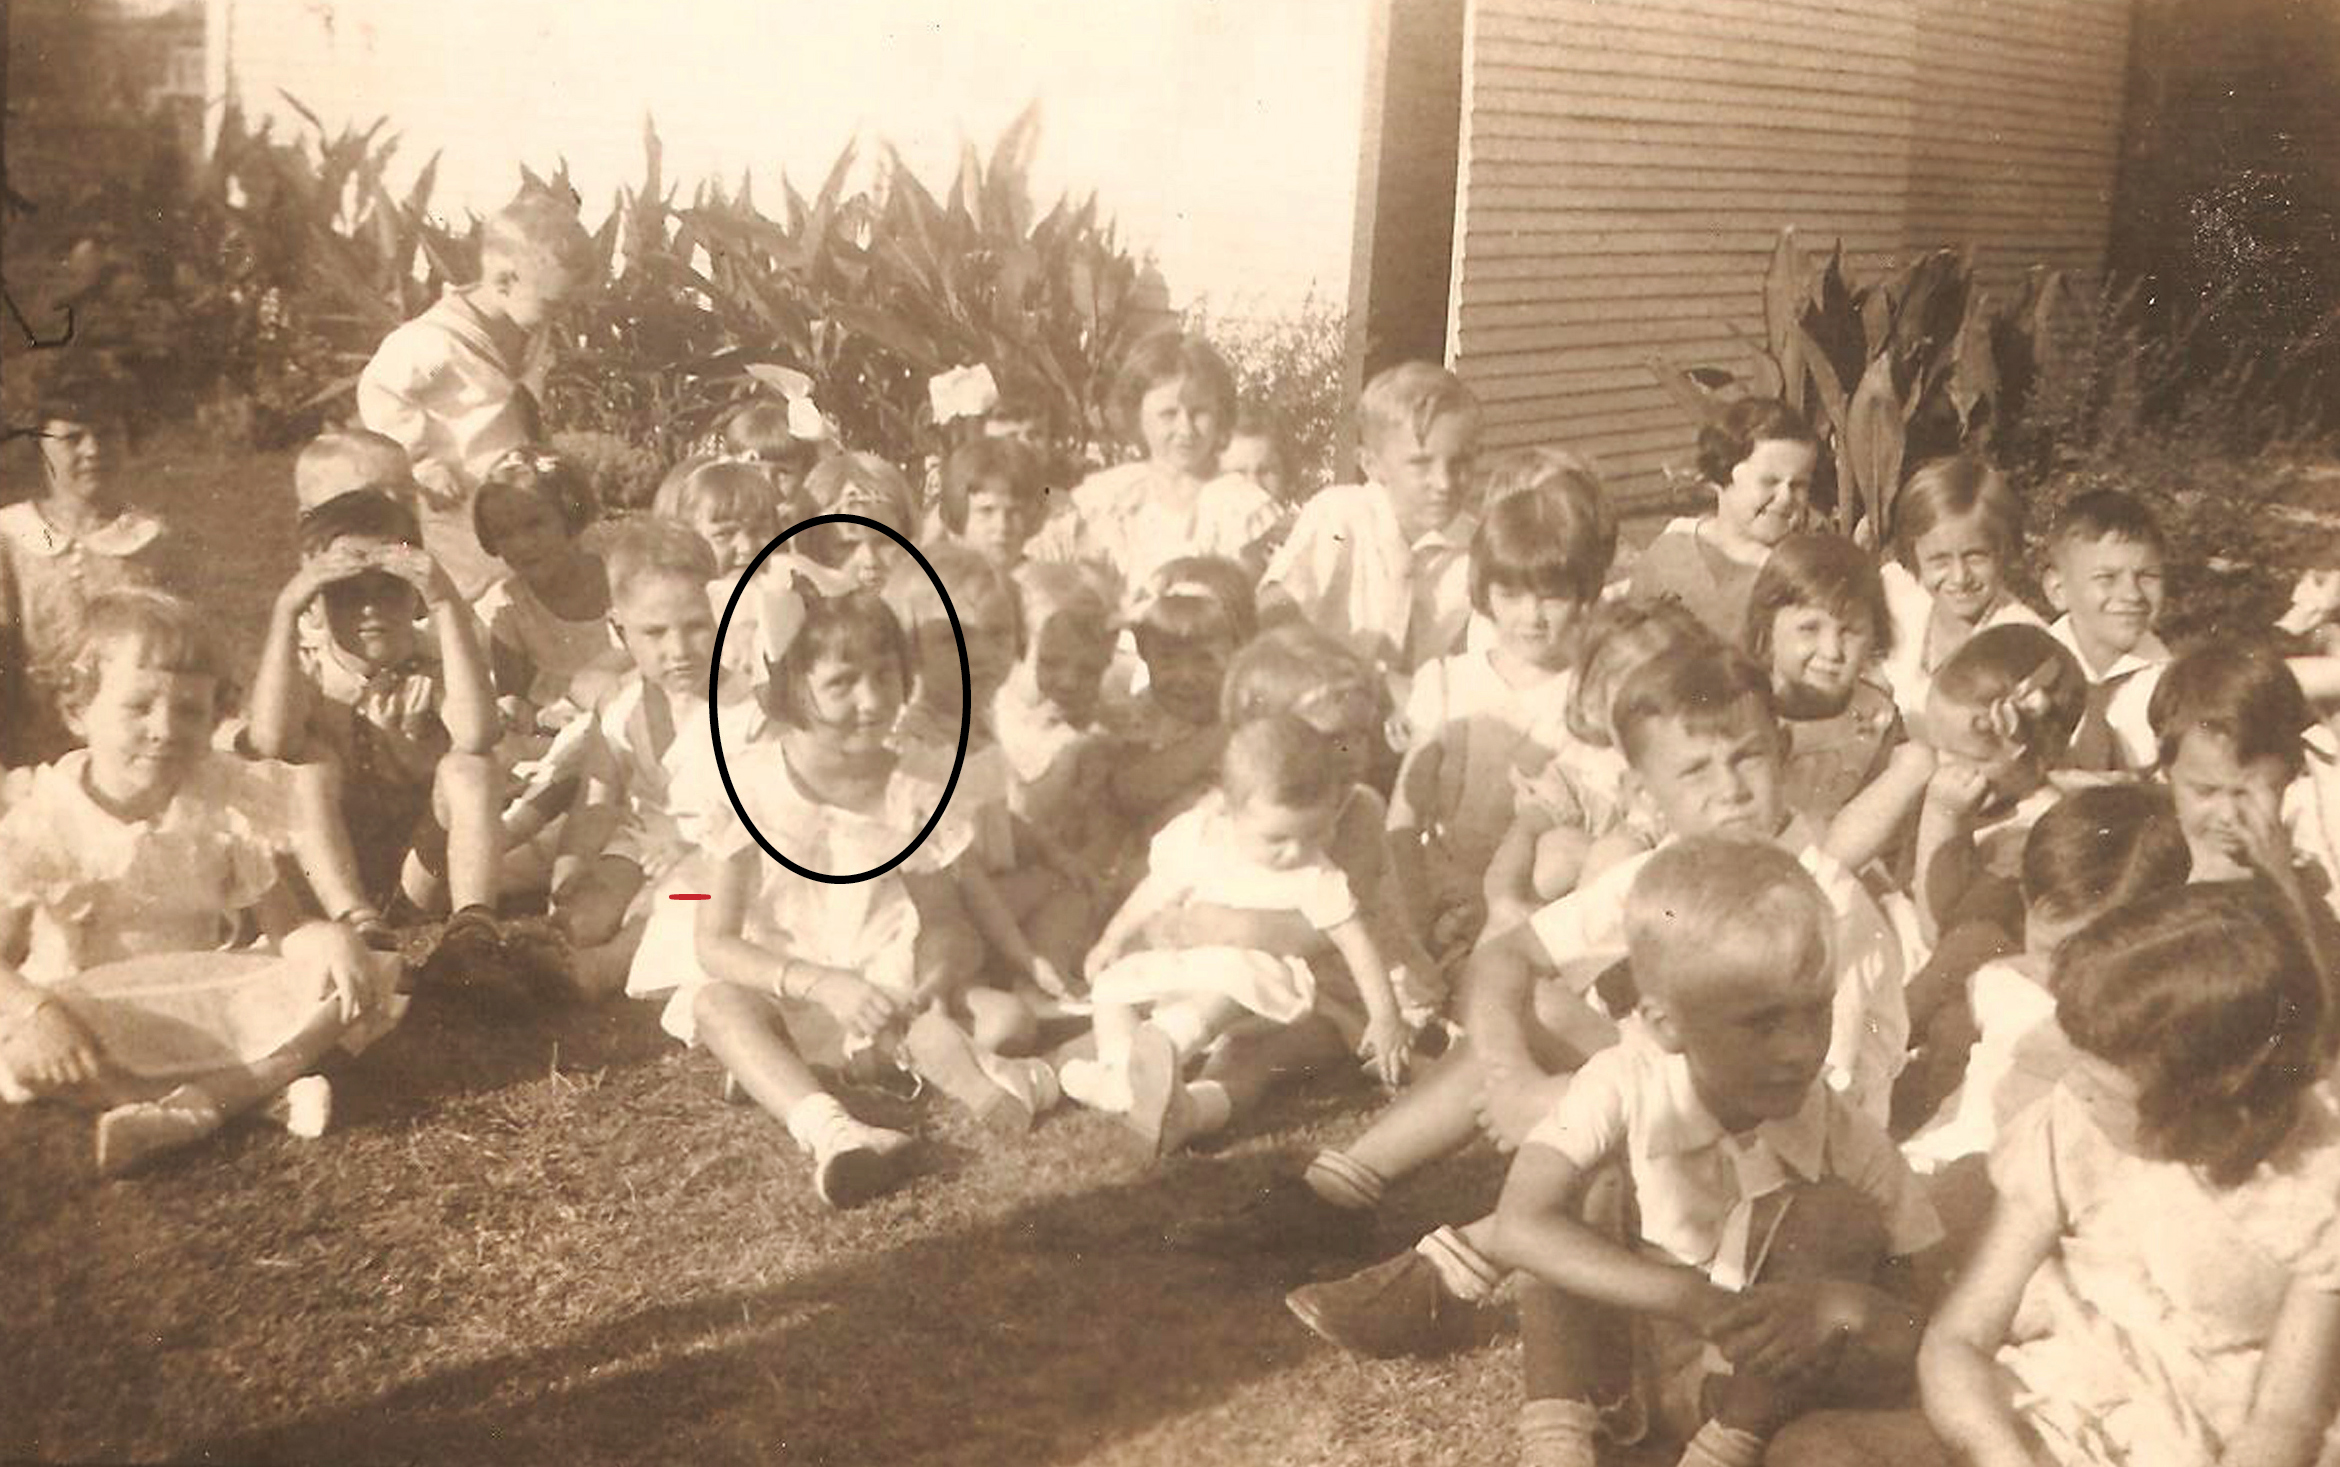 My Mother’s Fifth Birthday—August 5, 1933